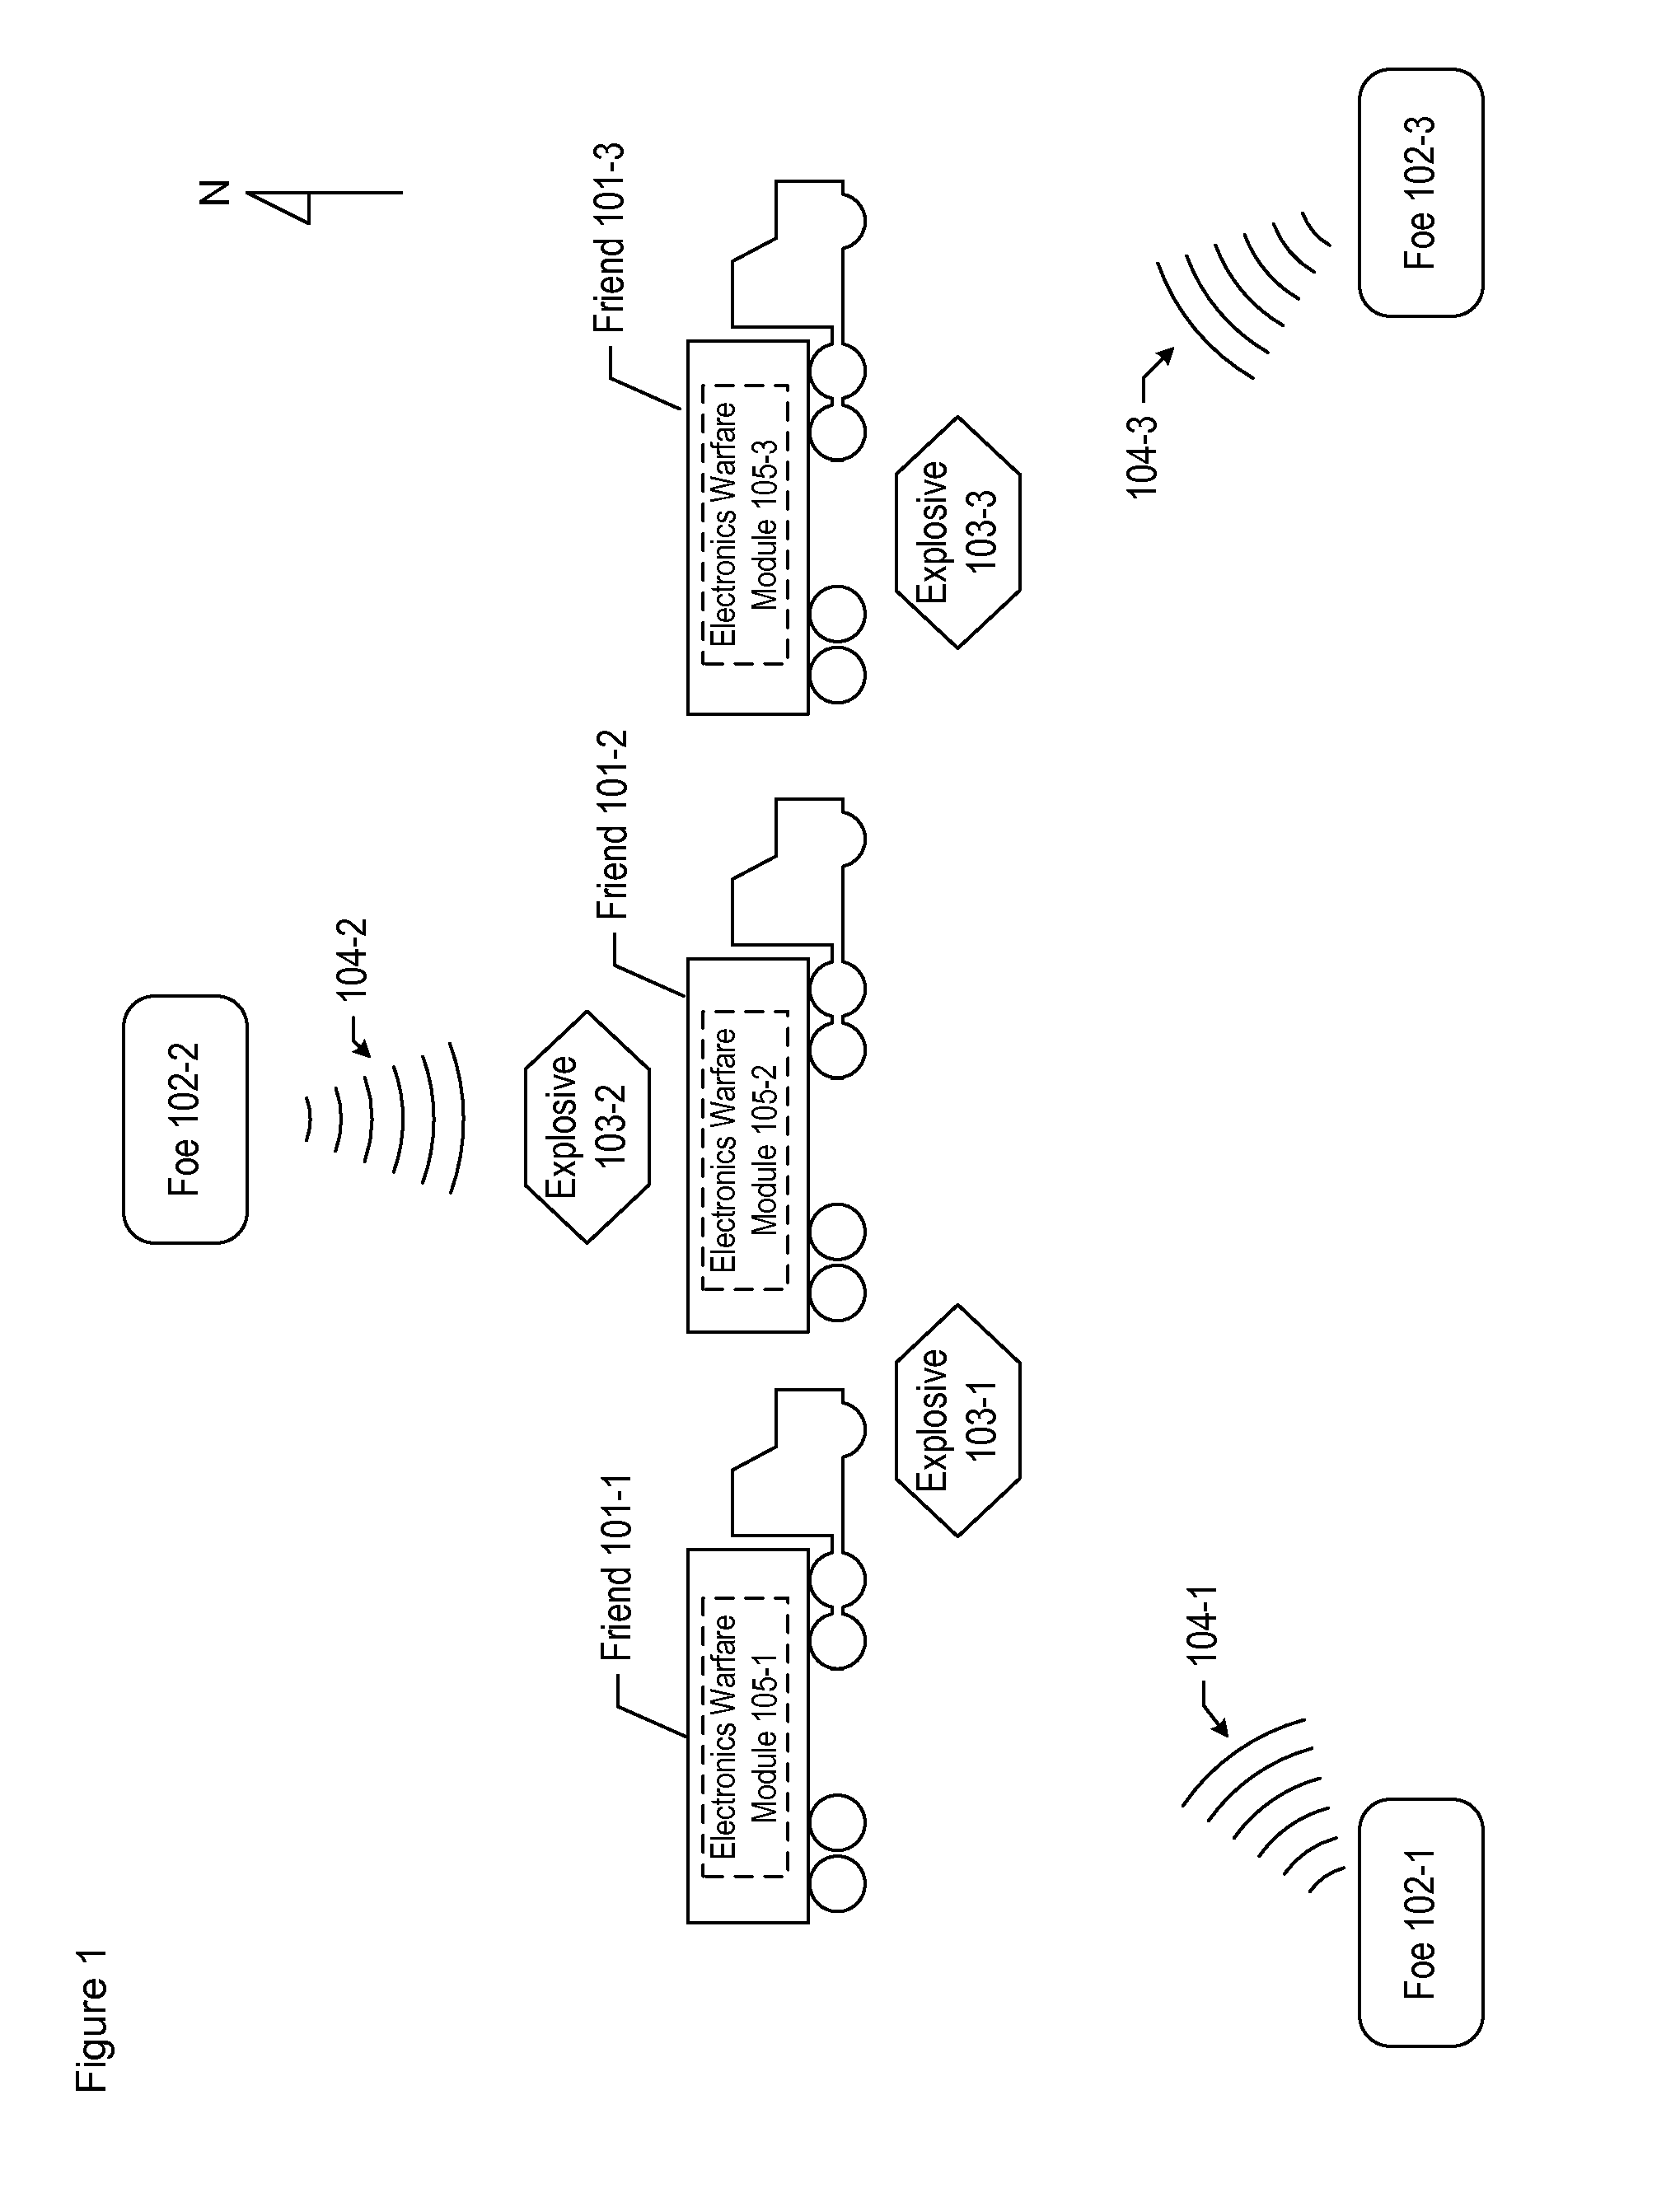 Distributed and coordinated electronic warfare system